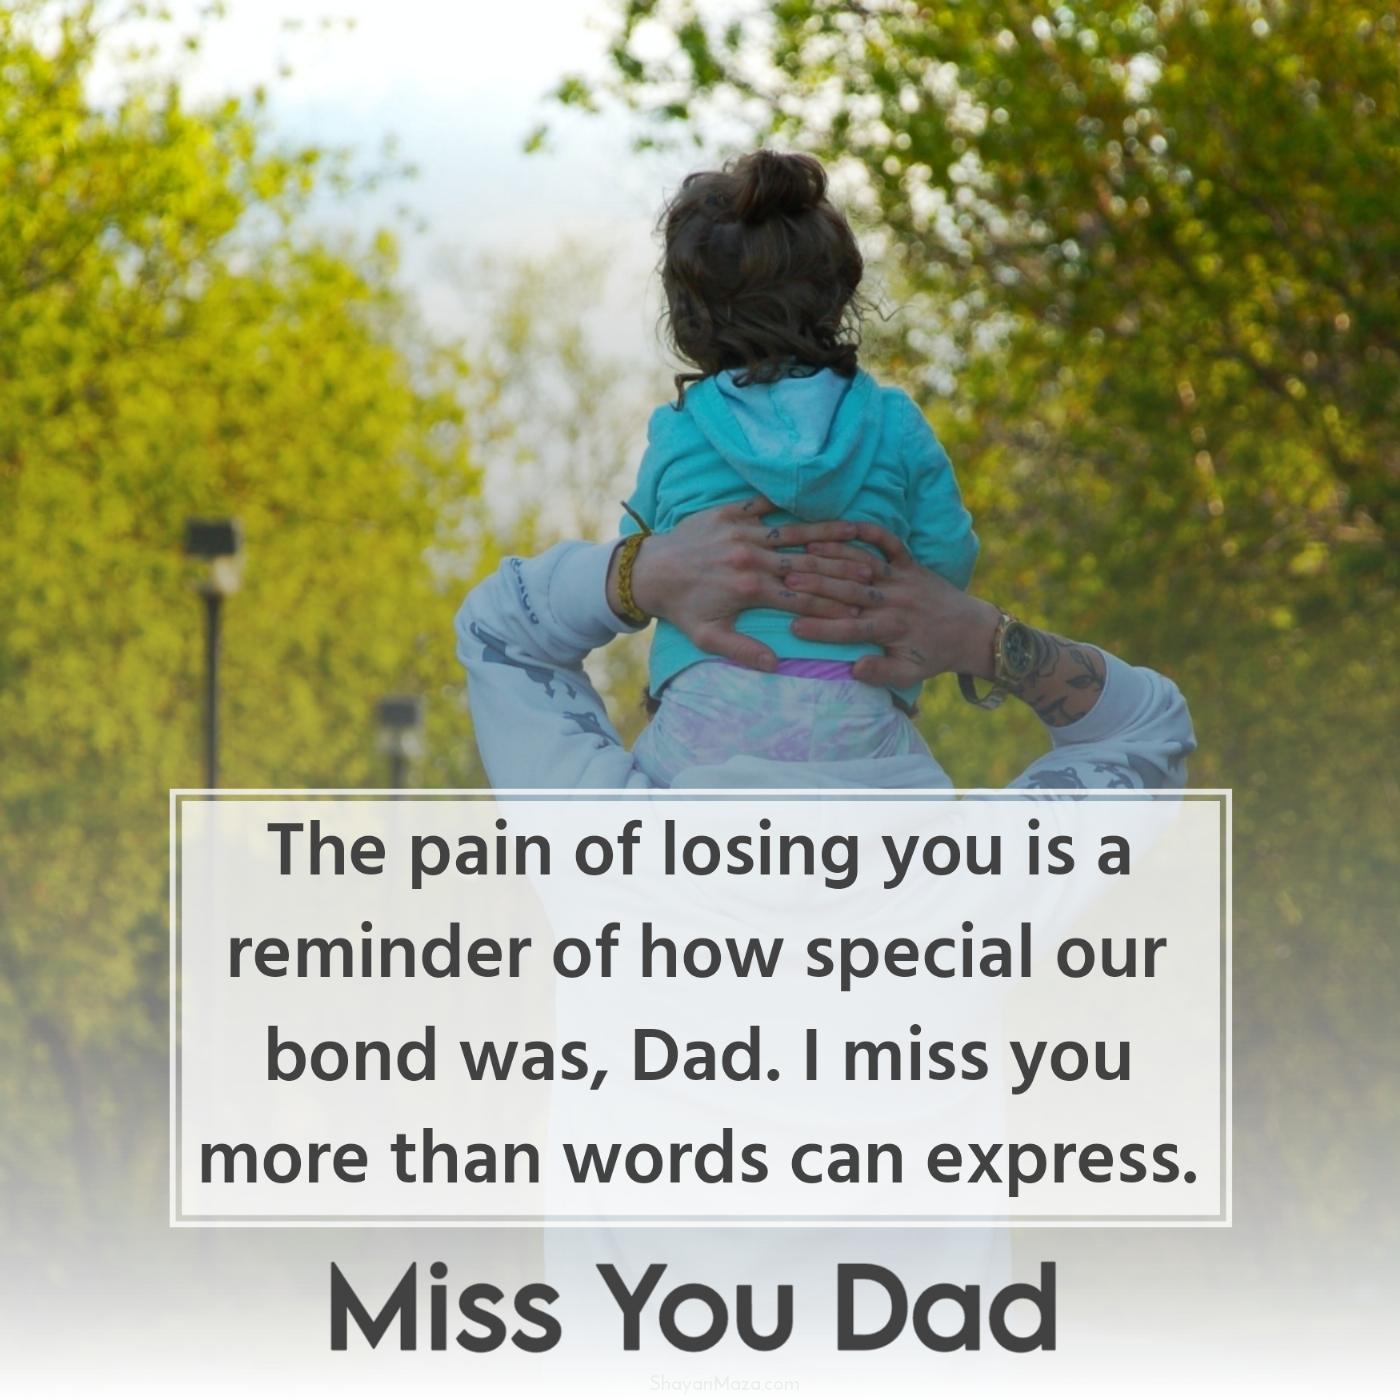 The pain of losing you is a reminder of how special our bond was Dad